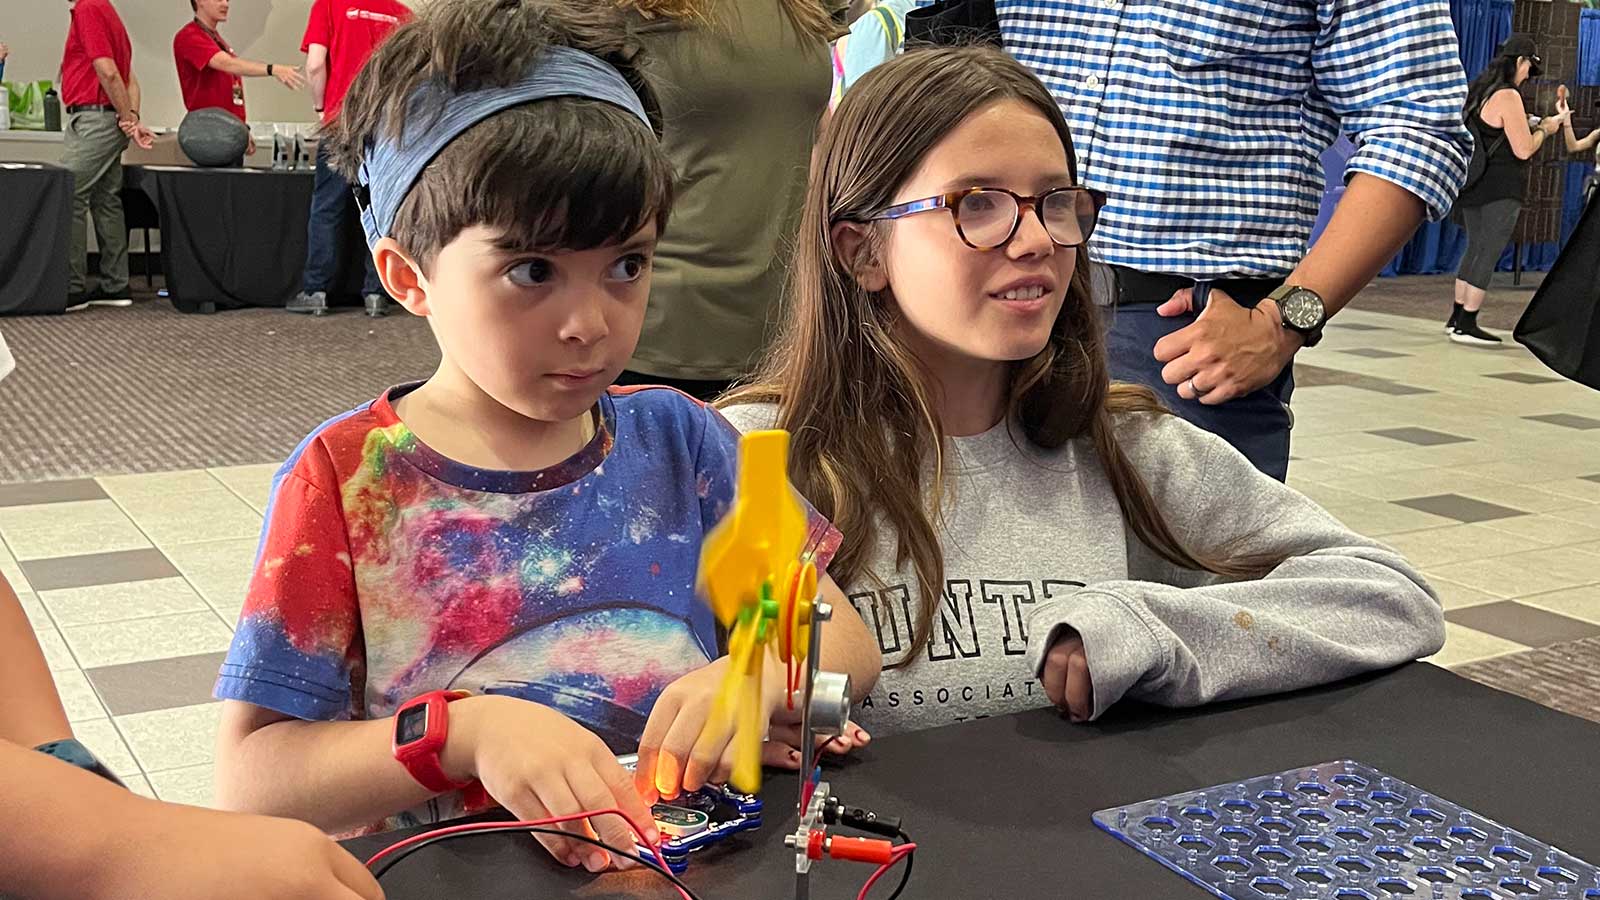 Two kids listen attentively to a scientist at a public event.